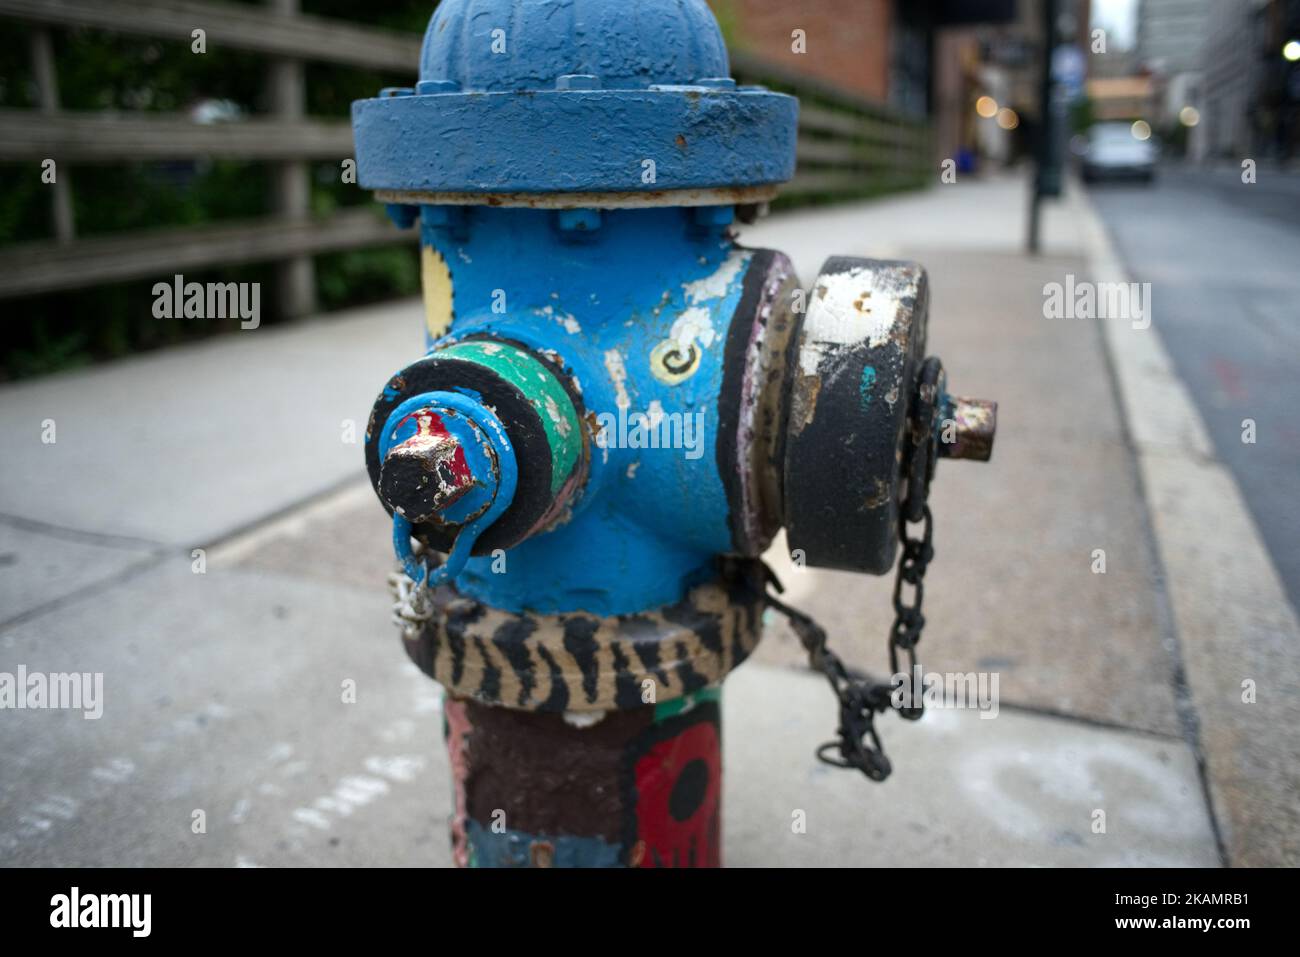 Fire-hydrant on a downtown Harrisburg, PA street, on April 30, 2017. Diminishing retail, crumbling infrastructure, environmental issues, poverty and unemployment are shown in a view on the current state of a section of rural America on day 101 of Trump's Presidency. The Keystone state Pennsylvania formed an important factor in Trump's victory in the 2016 US elections. (Photo by Bastiaan Slabbers/NurPhoto) *** Please Use Credit from Credit Field *** Stock Photo